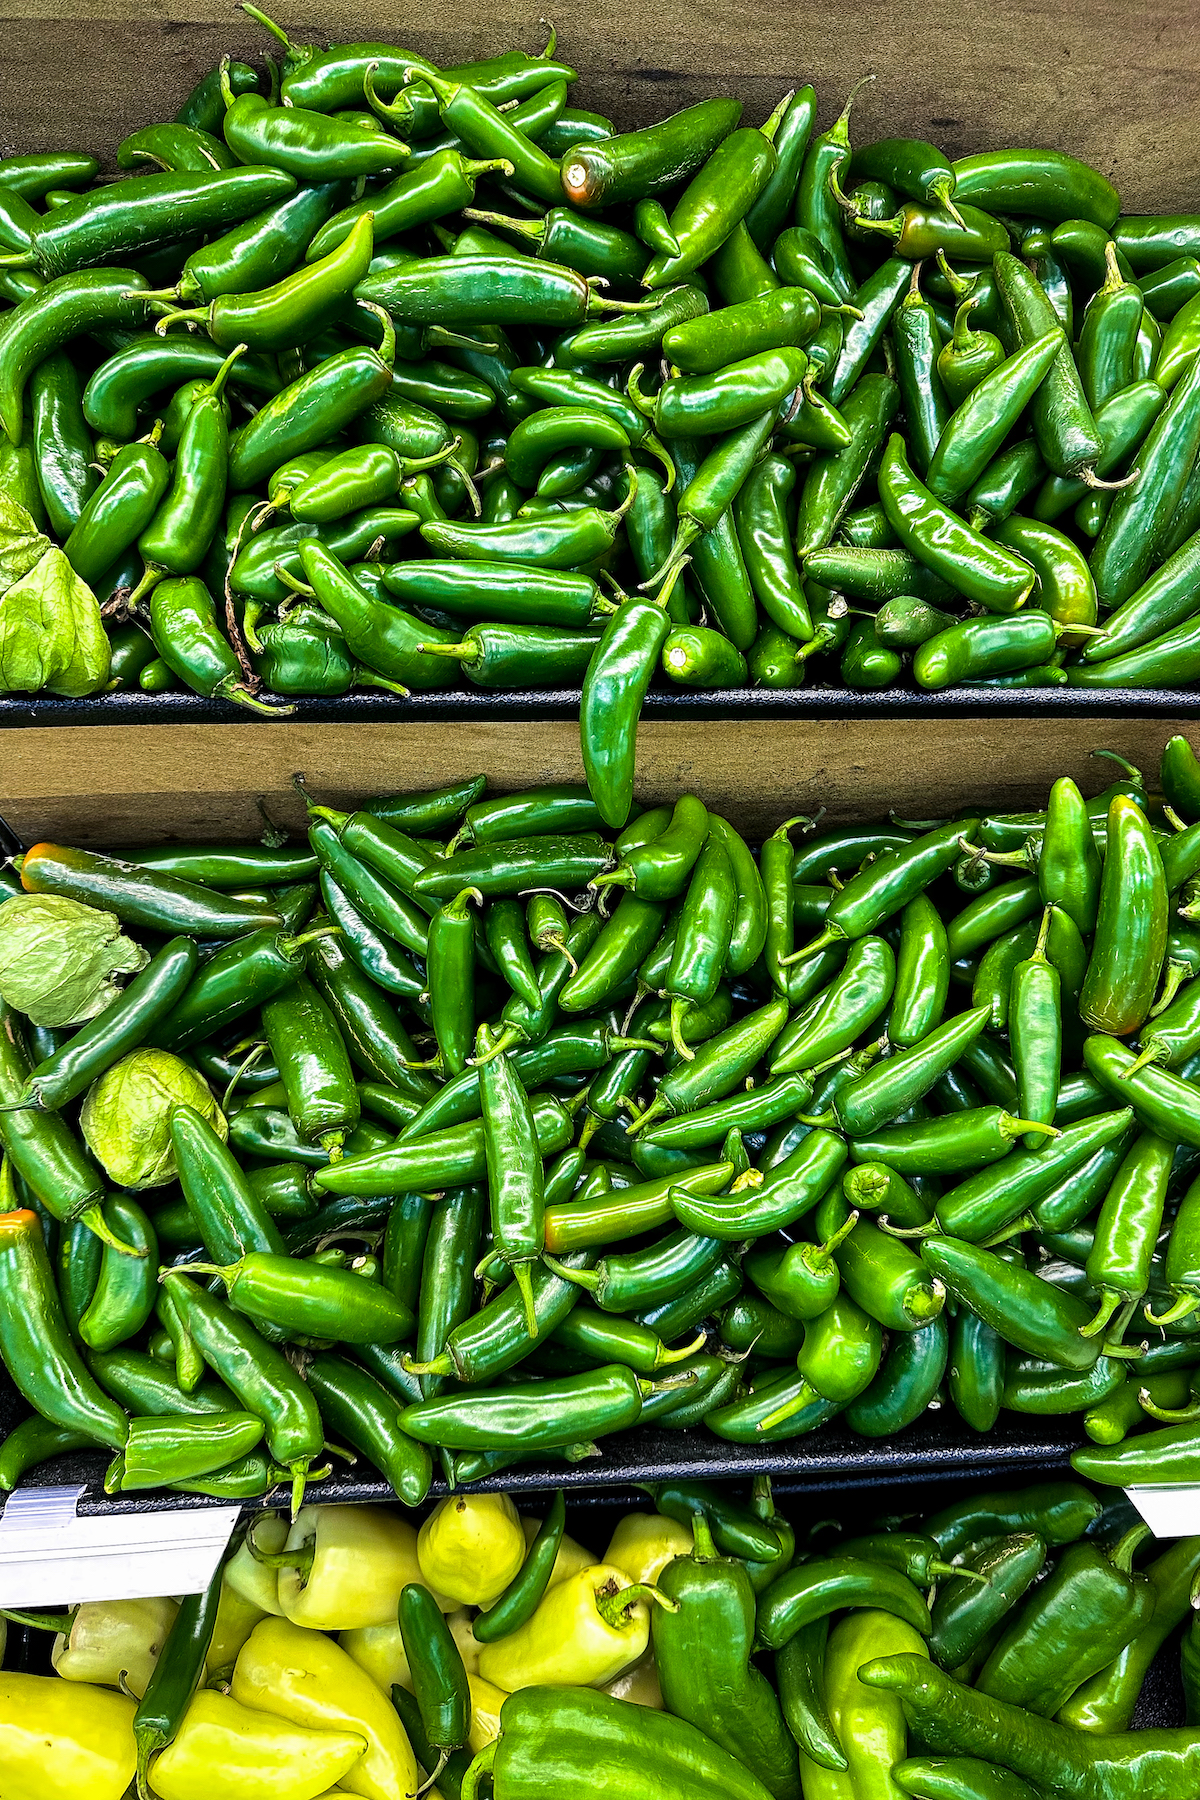 Serrano peppers in bins at the grocery store.